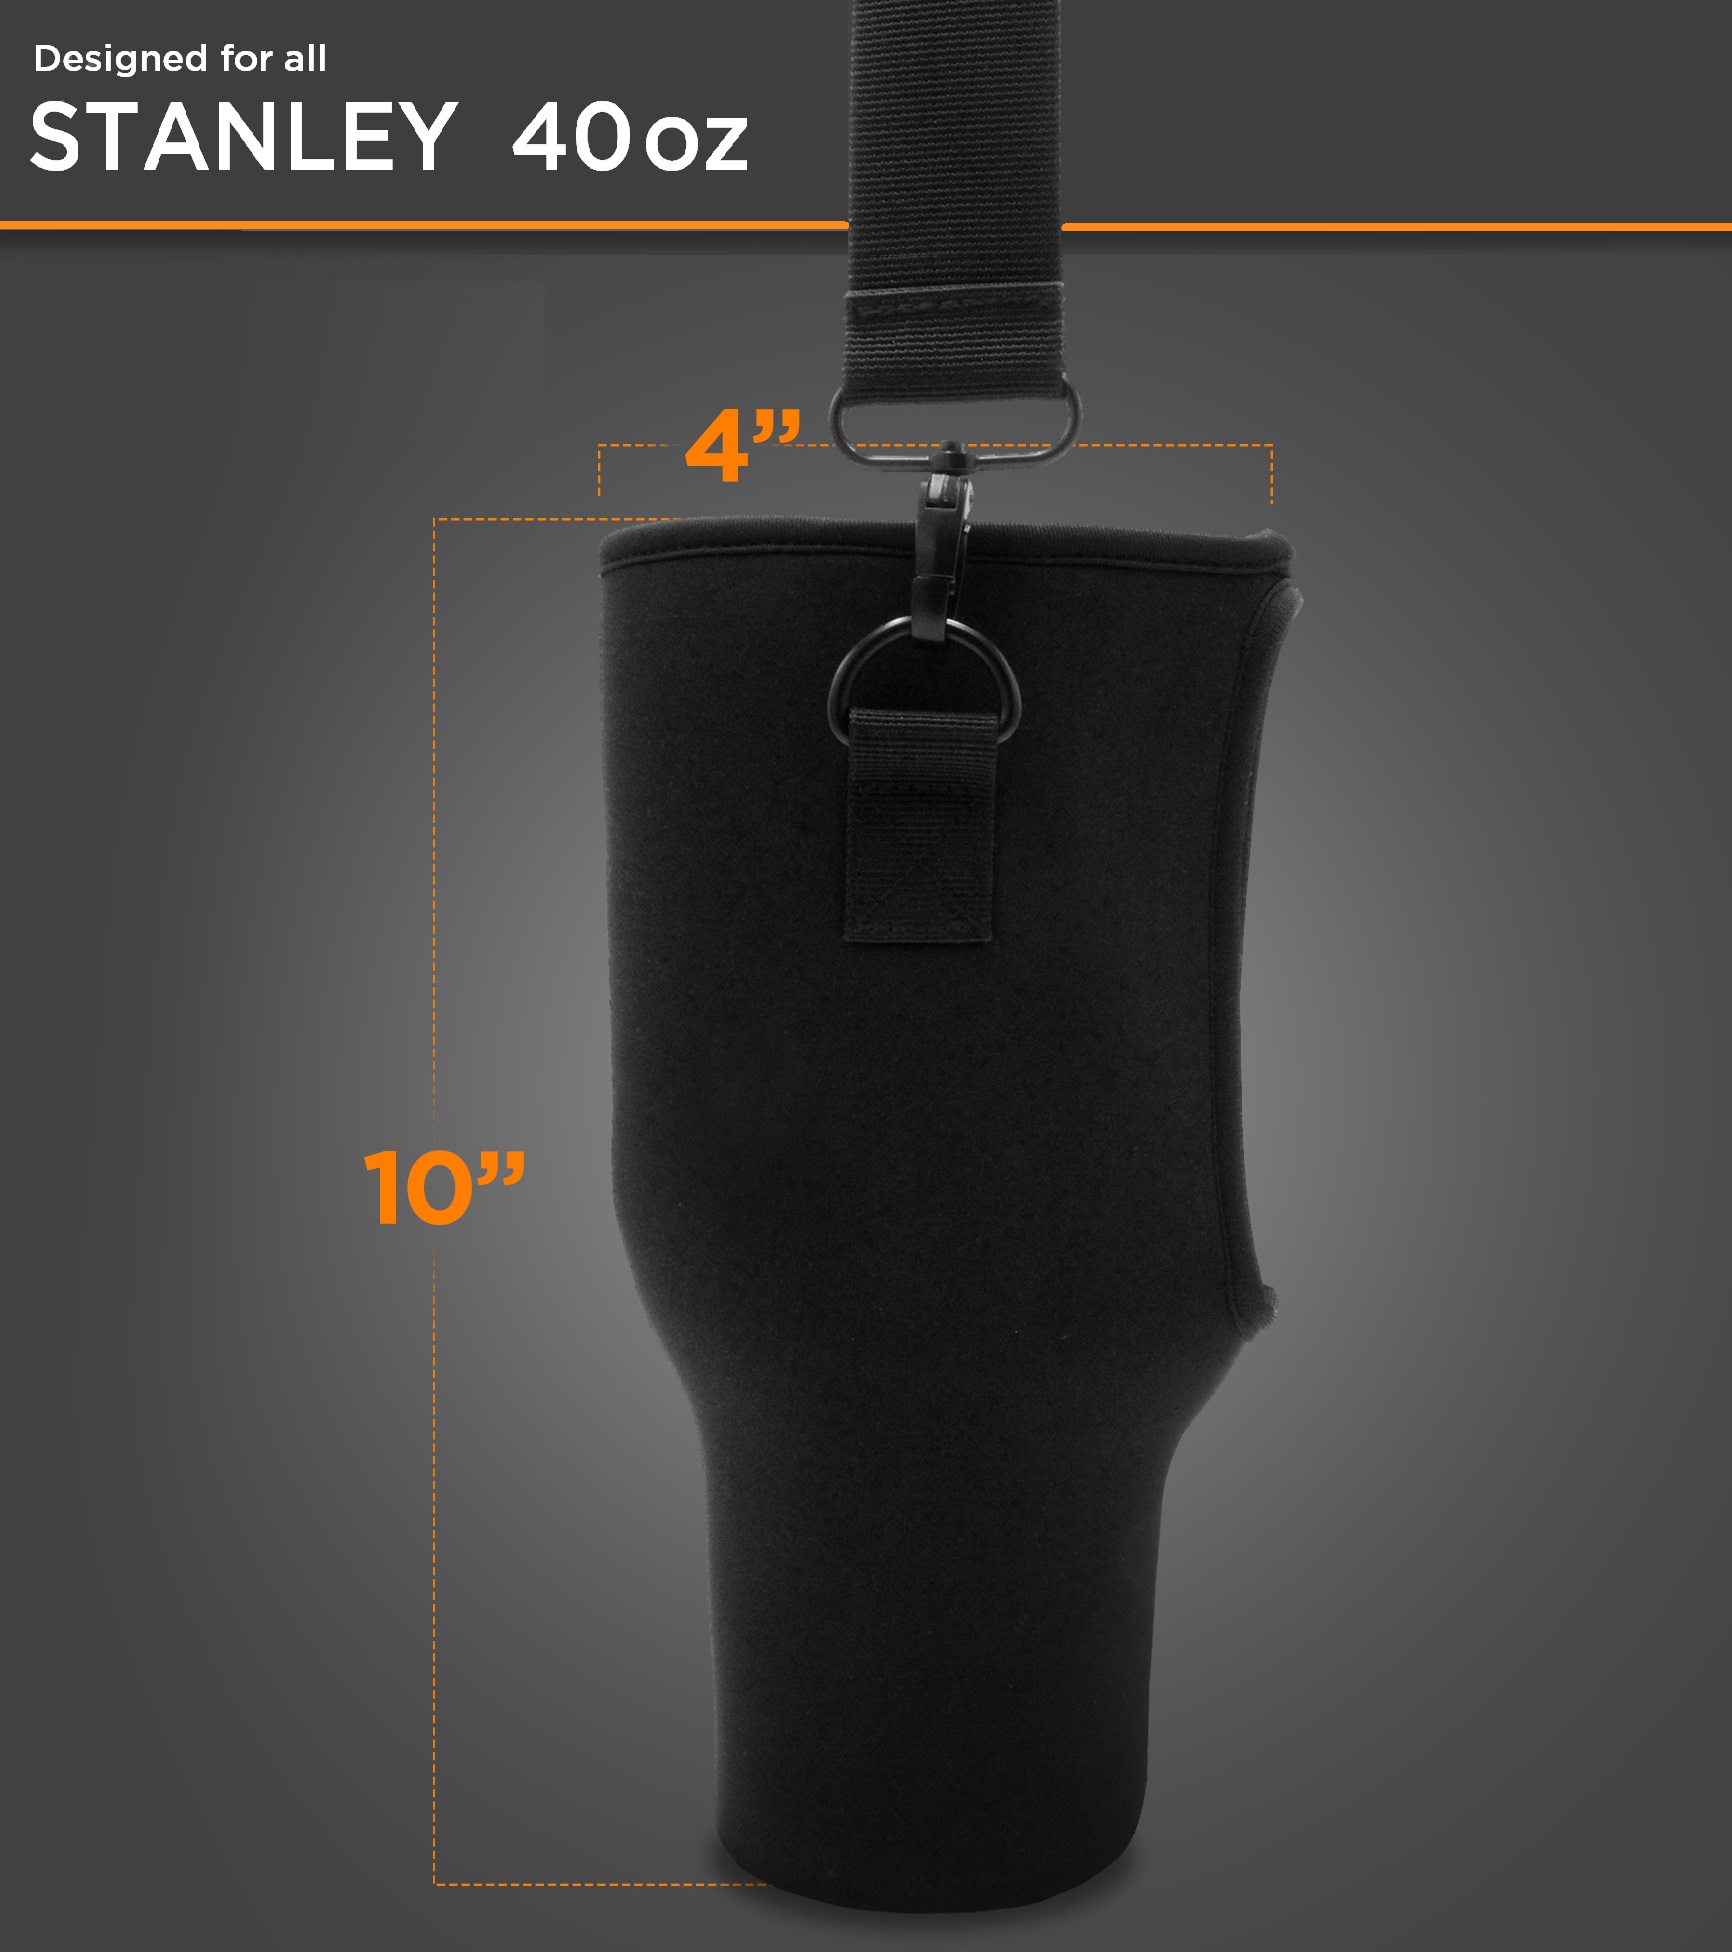 Bogg Bag Stanley 40oz Cup Holder With Bag Attachments Included